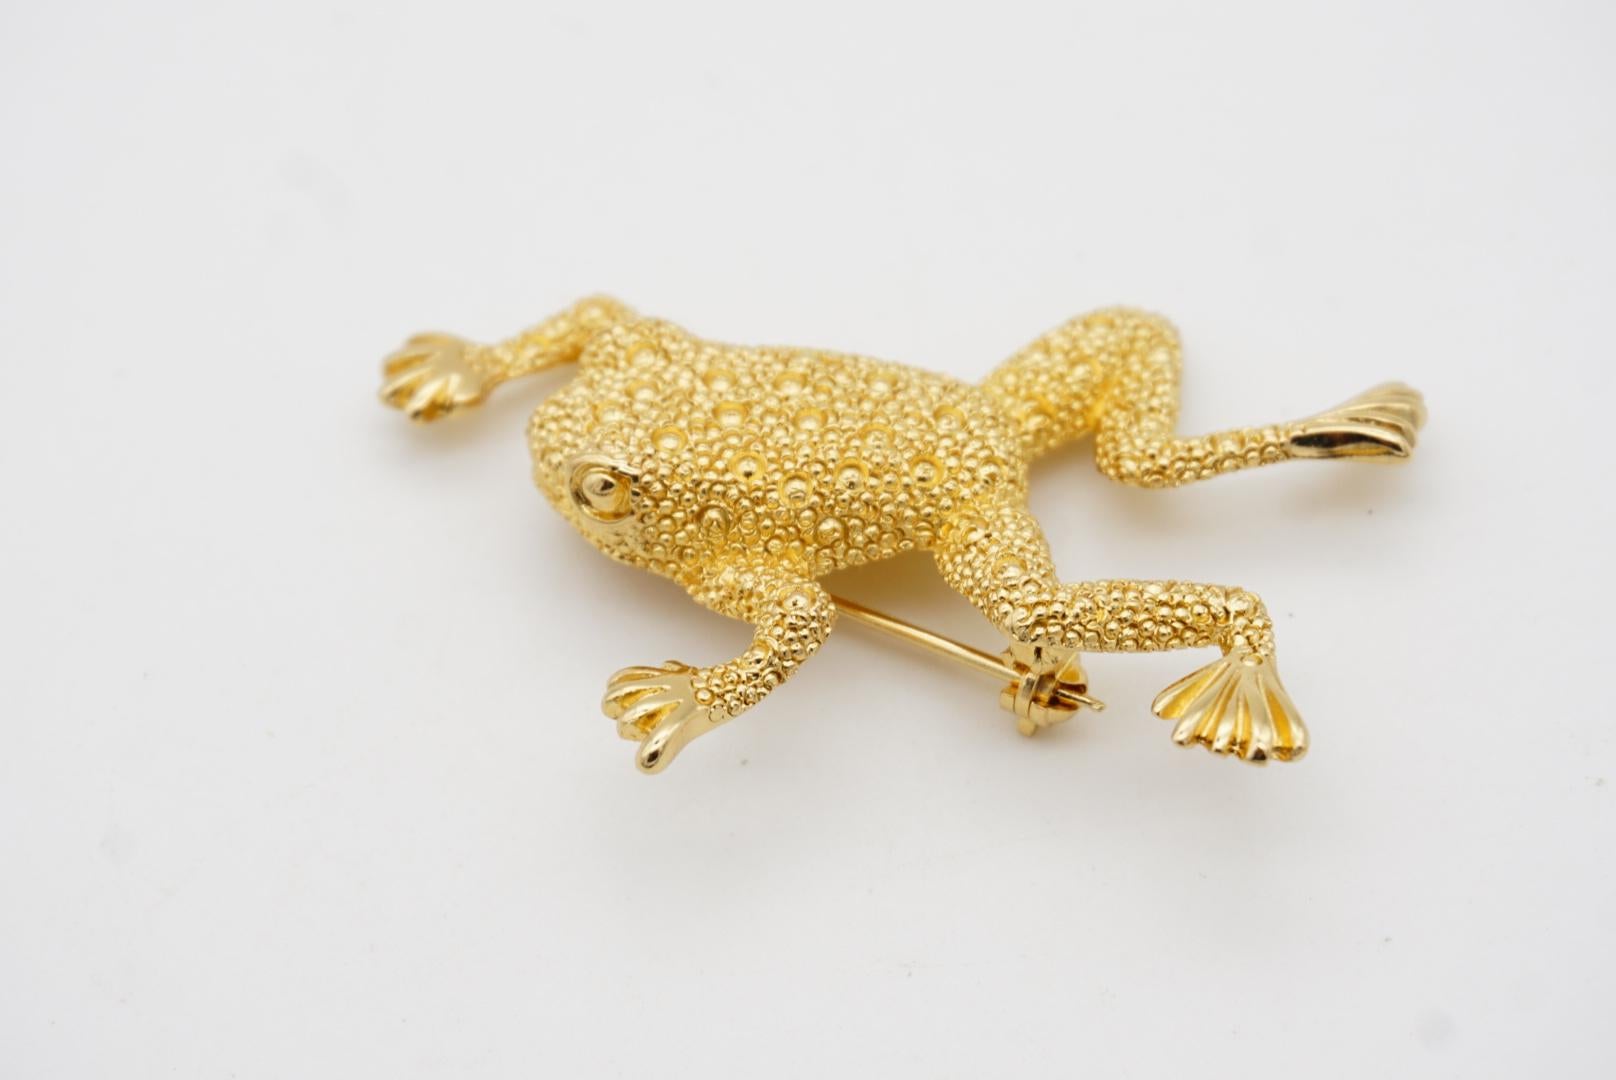 Christian Dior 1980s Vintage Textured Vivid Cute Jumping Swimming Frog Brooch For Sale 2